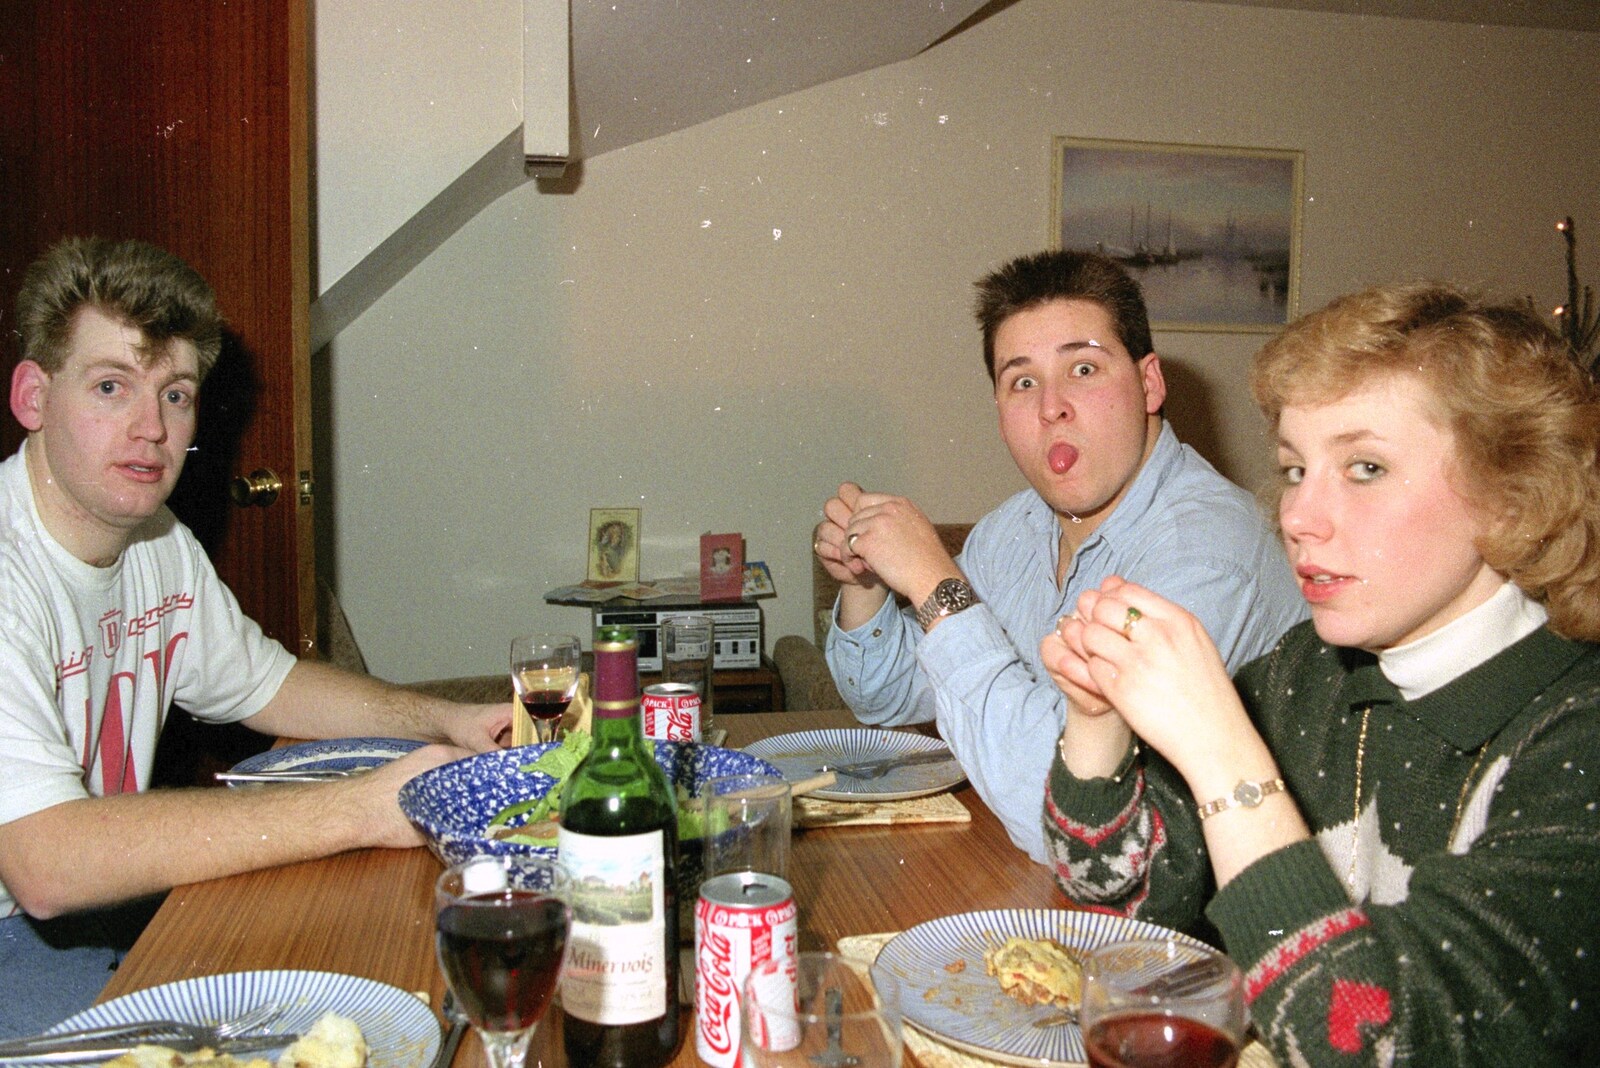 Barney sticks his tongue out from Late Night, and Christmas with the Coxes, Needham, Norfolk - 25th December 1989